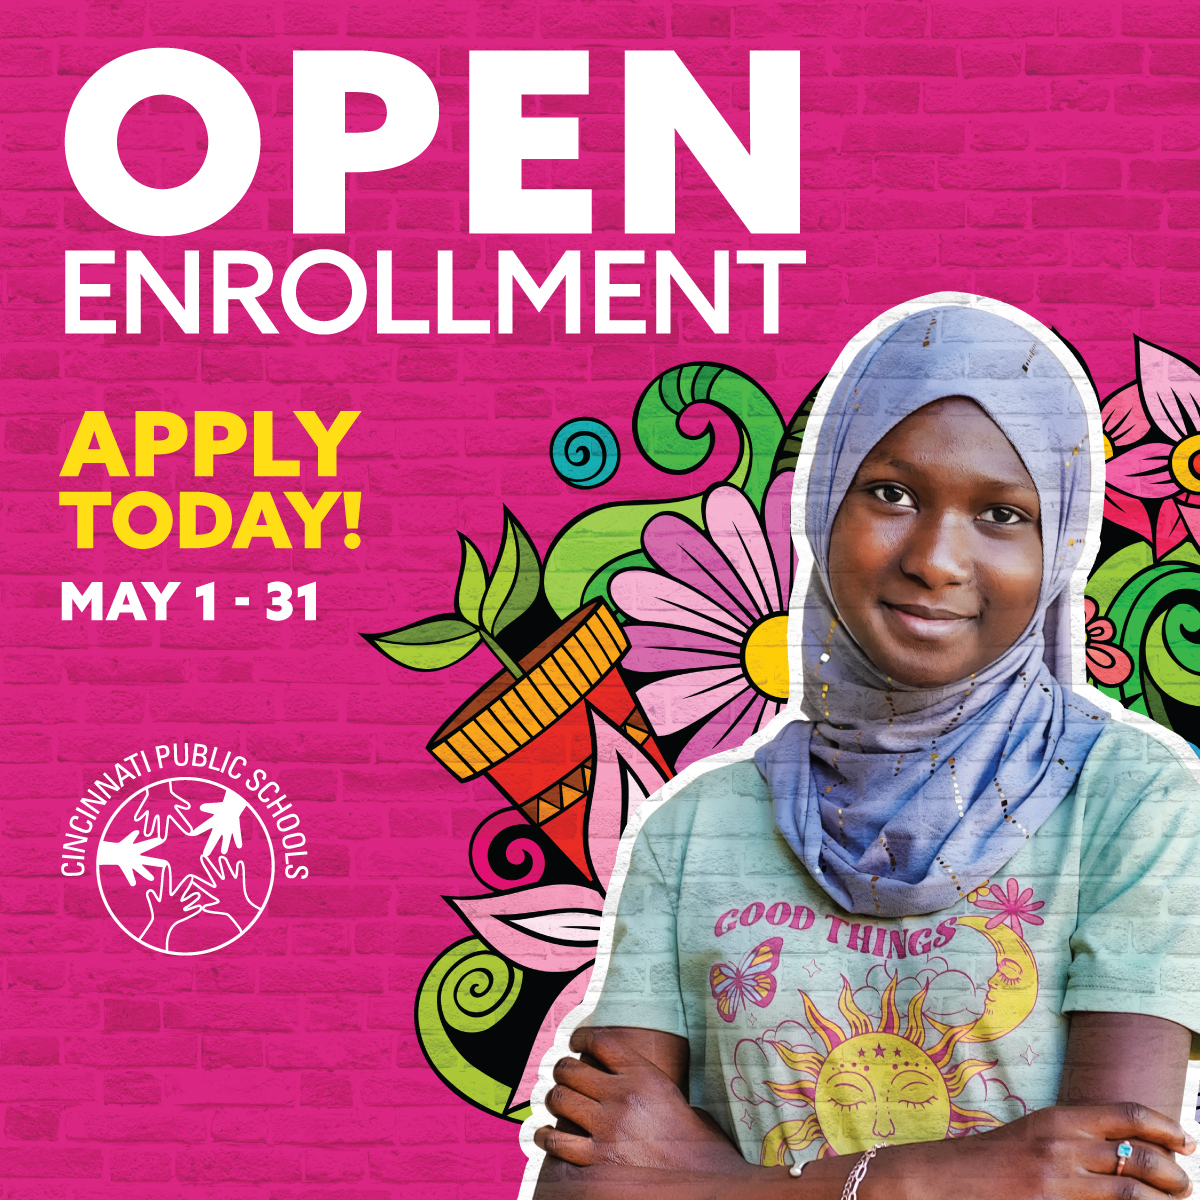 7 more days of CPS Out-of-District Open Enrollment! Students in preschool through 12th grade who live outside the boundaries of the Cincinnati Public School District may apply for admission to CPS schools through May 31! Learn more and apply at: brnw.ch/21wK7hU